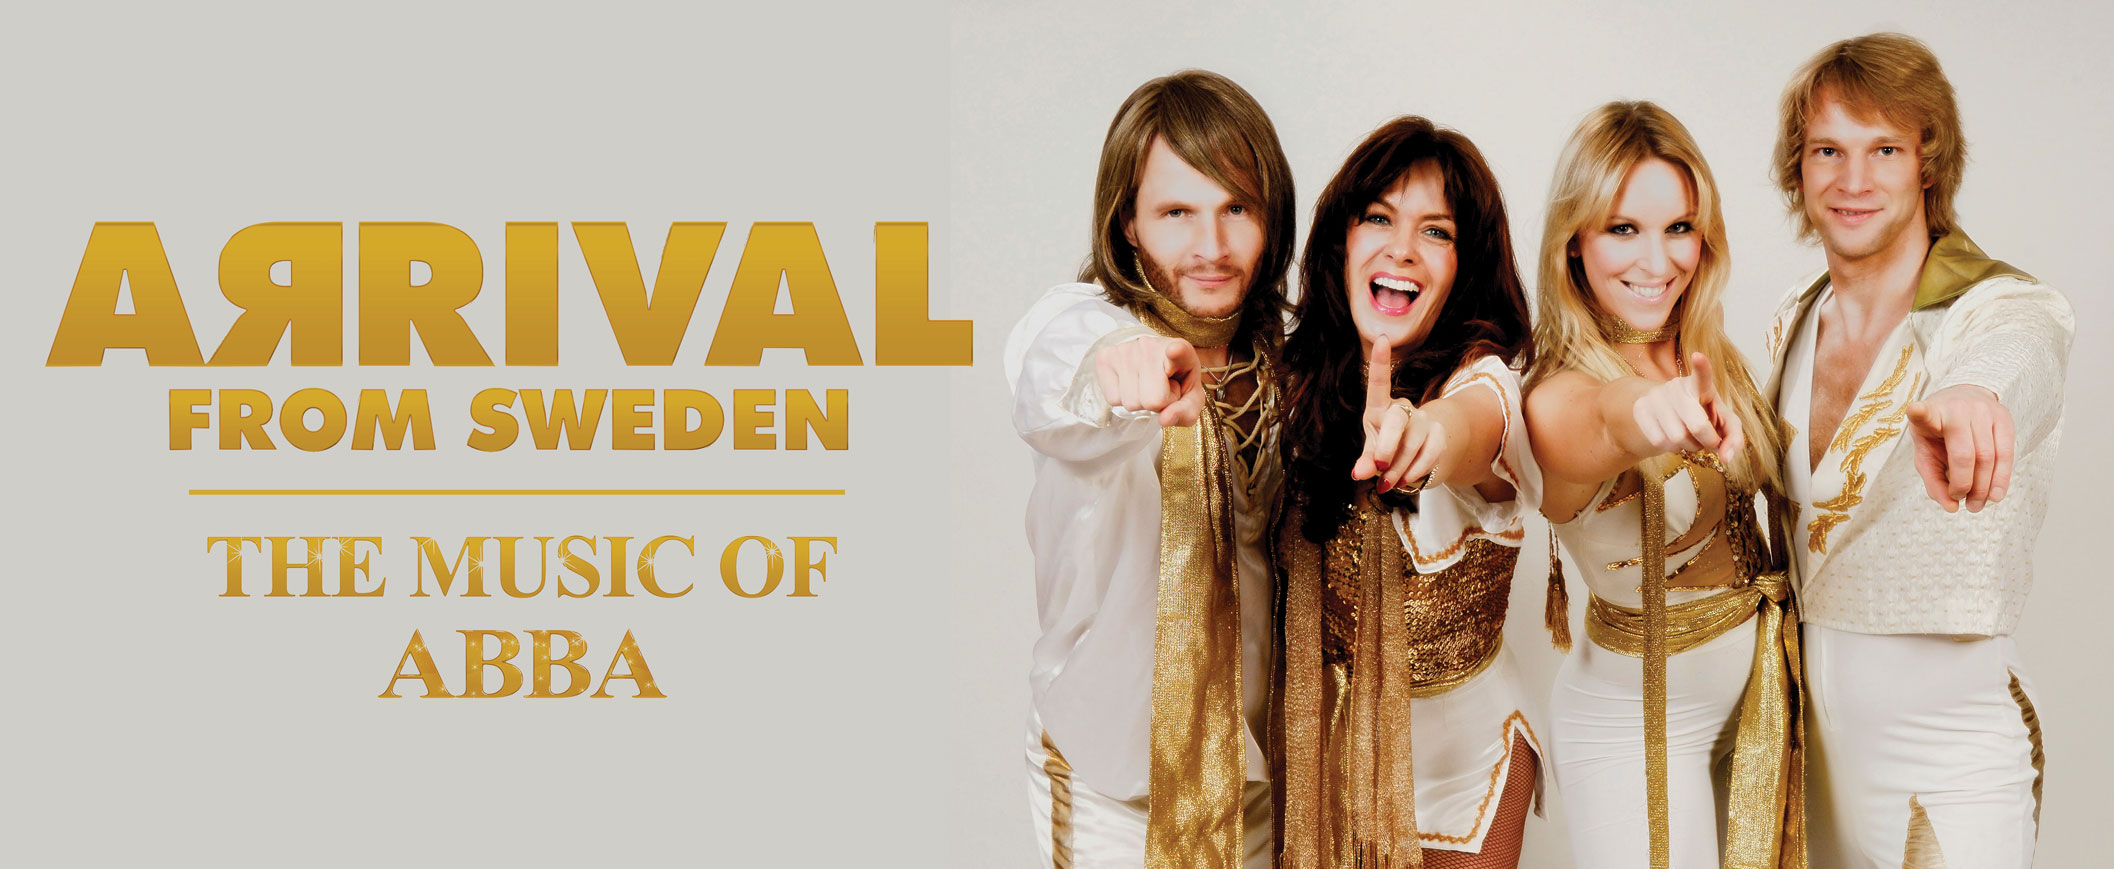 ARRIVAL from Sweden: ABBA Info Page Header